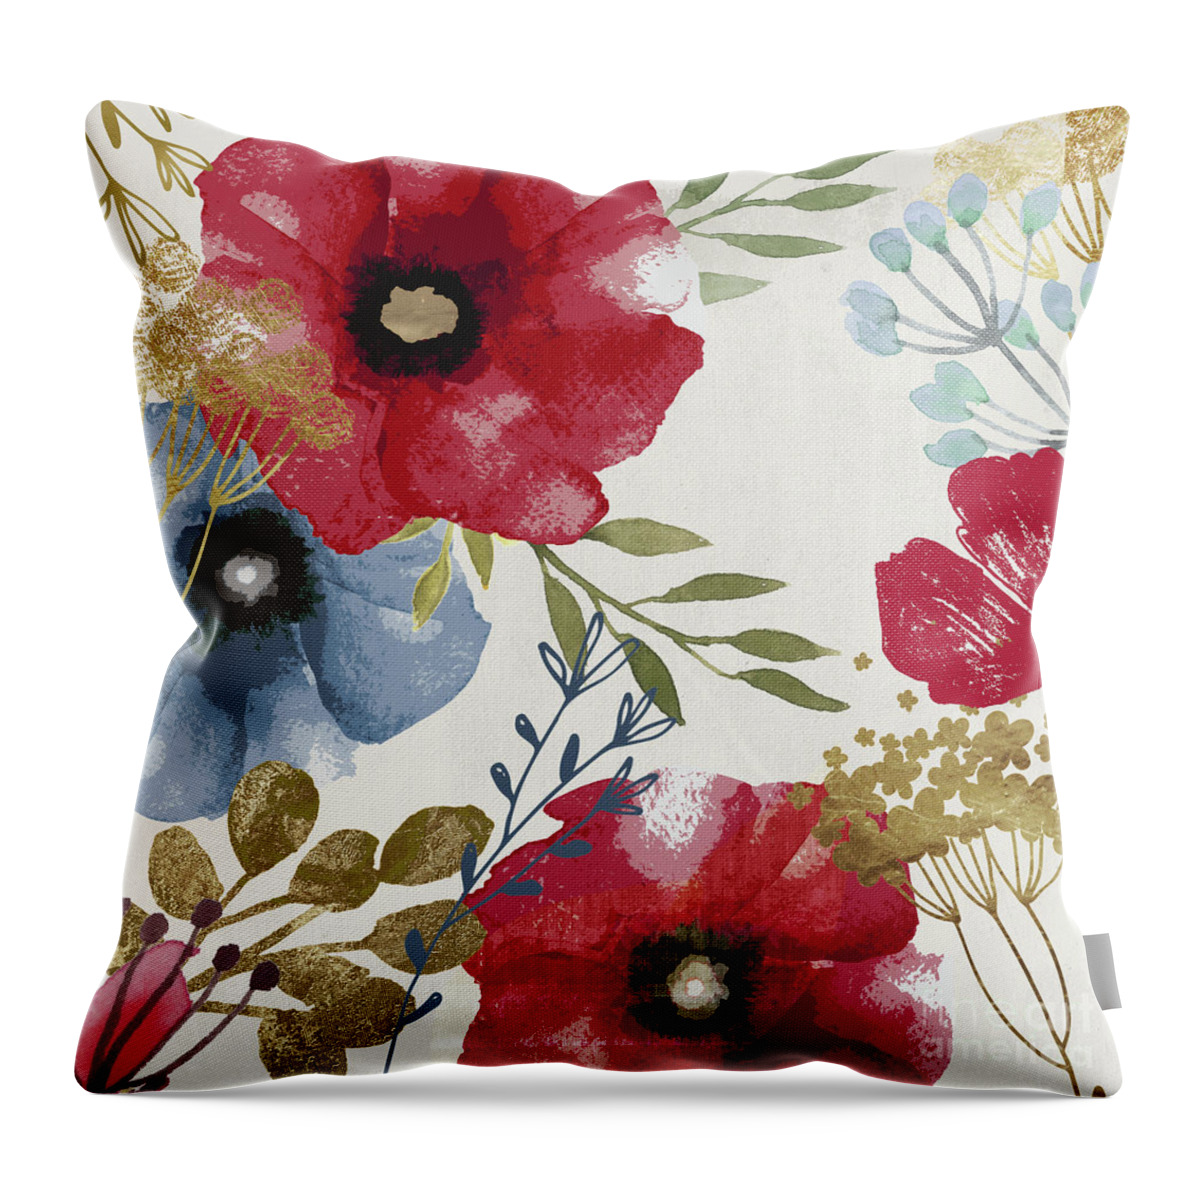 Poppies Throw Pillow featuring the painting Posy Watercolor Poppies by Mindy Sommers